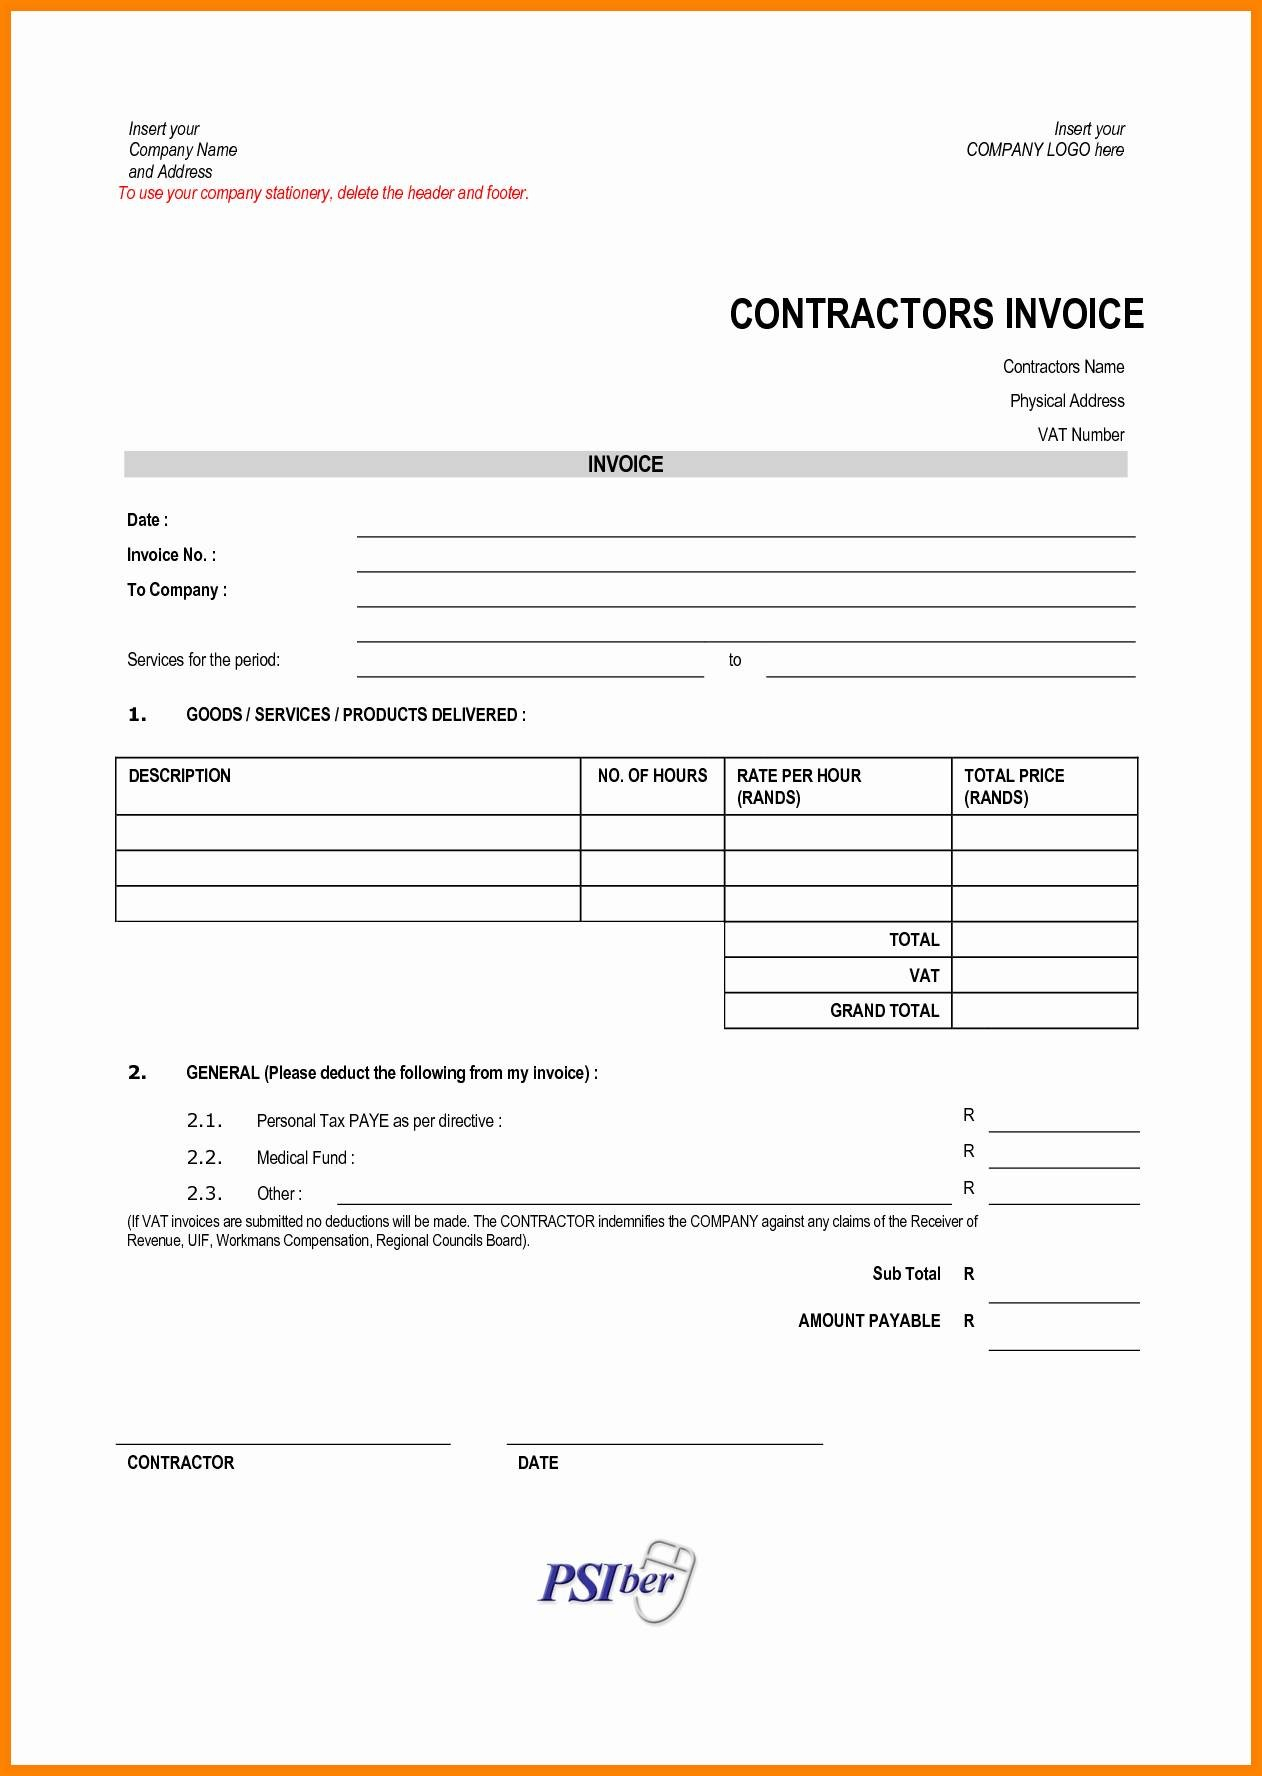 Free Construction Invoice Template Pdf Excel Construction Estimating Inside Construction Estimating Templates For Excel Free